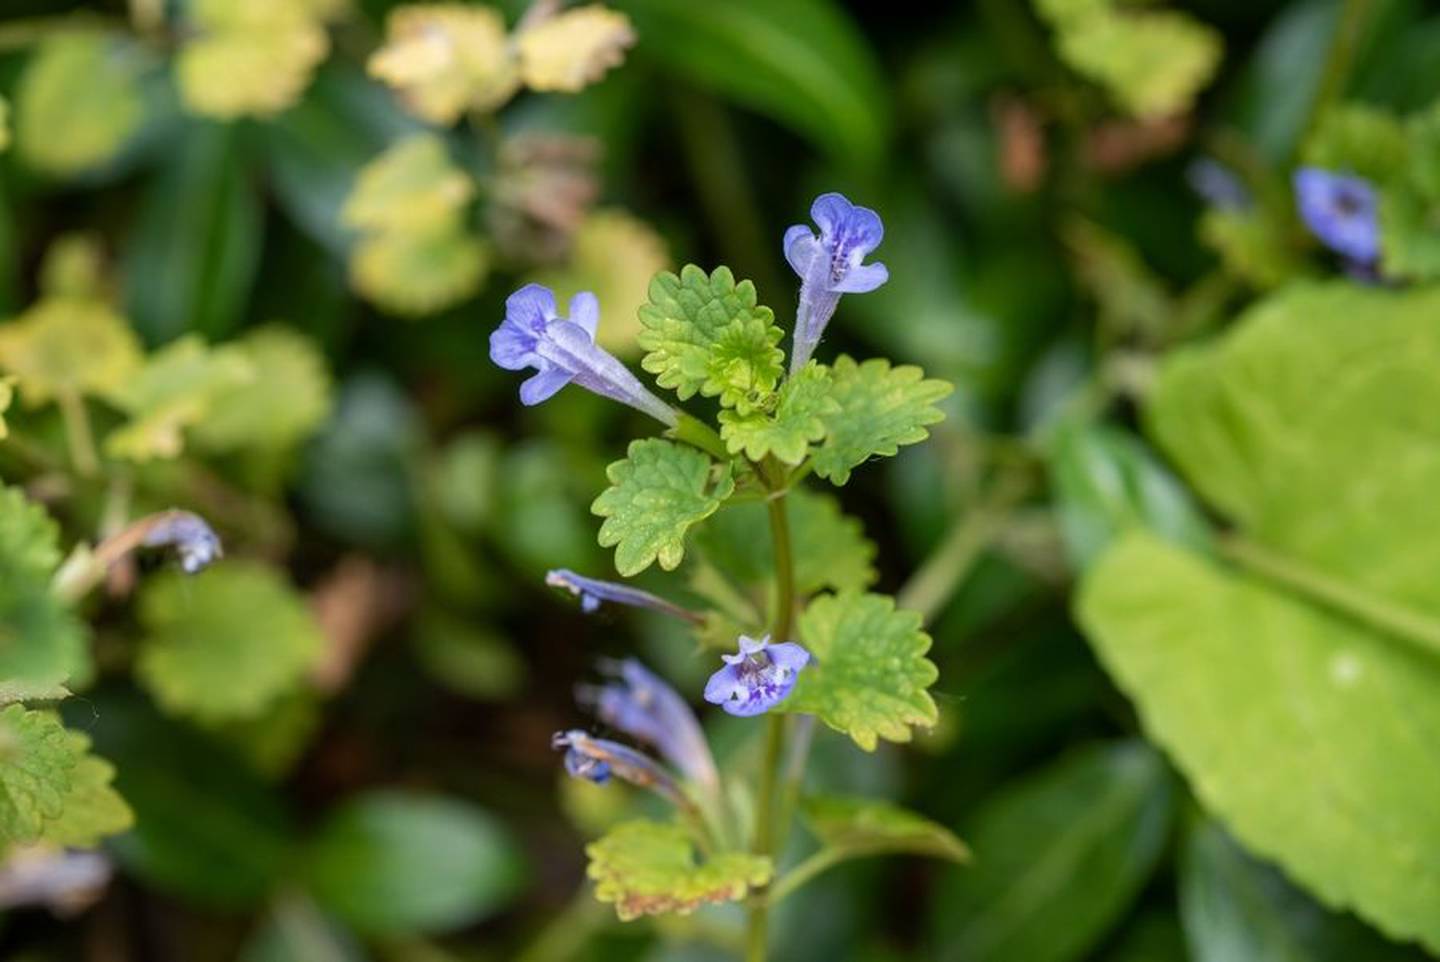 Ground-ivy, or creeping Charlie, can give you a run for your money in the battle to eradicate weeds.  Your best bet is to pull it as soon as you notice it.